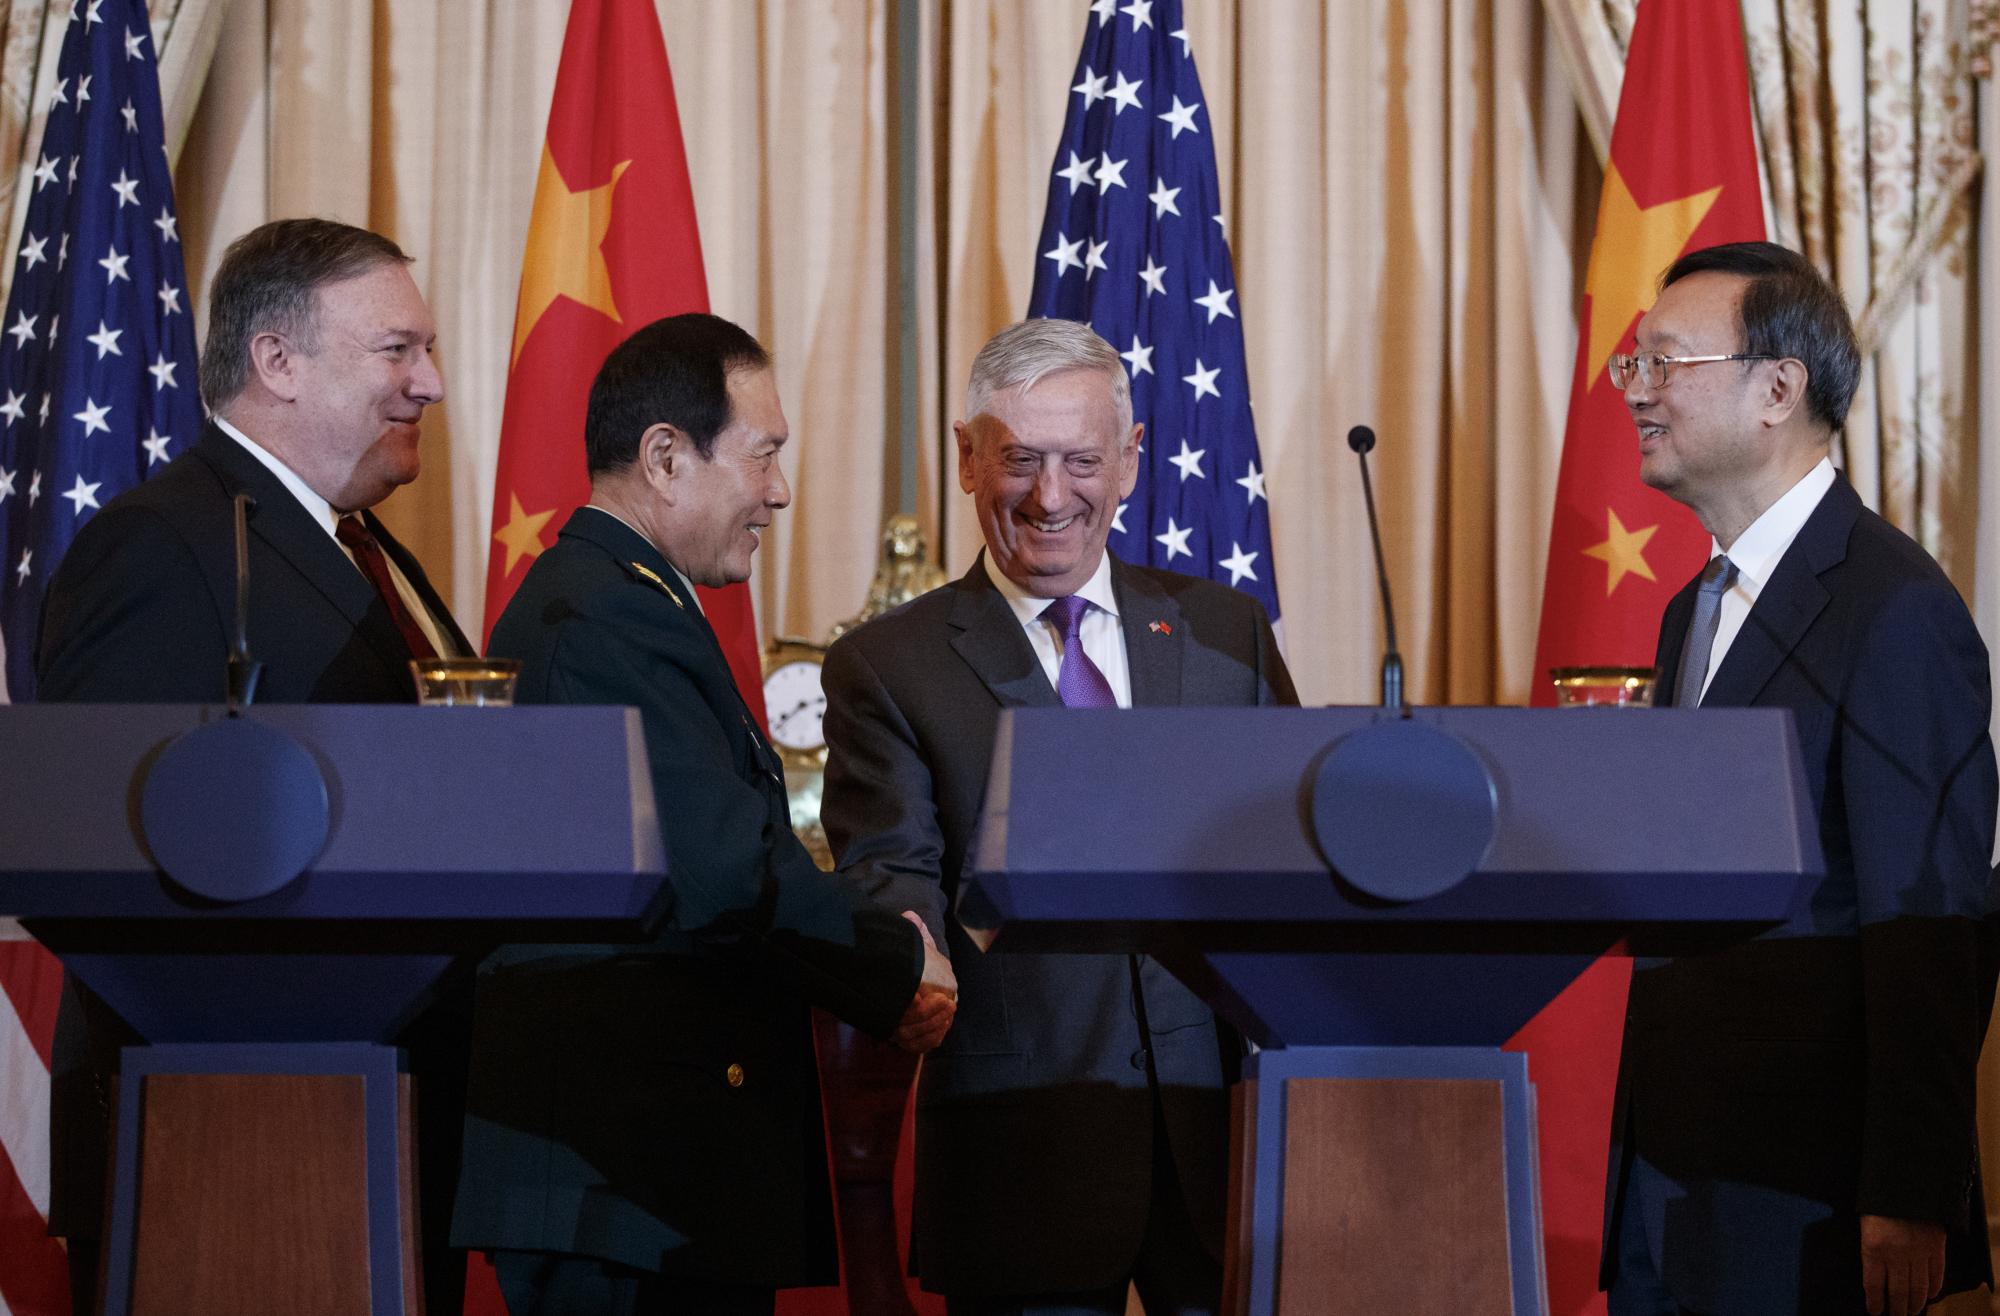 U.S. Secretary of State Mike Pompeo, Chinese Defense Minister Gen. Wei Fenghe (second from left), U.S. Secretary of Defense Jim Mattis and Chinese Politburo member Yang Jiechi shake hands at the conclusion of a news conference at the State Department in Washington on Friday. | AP